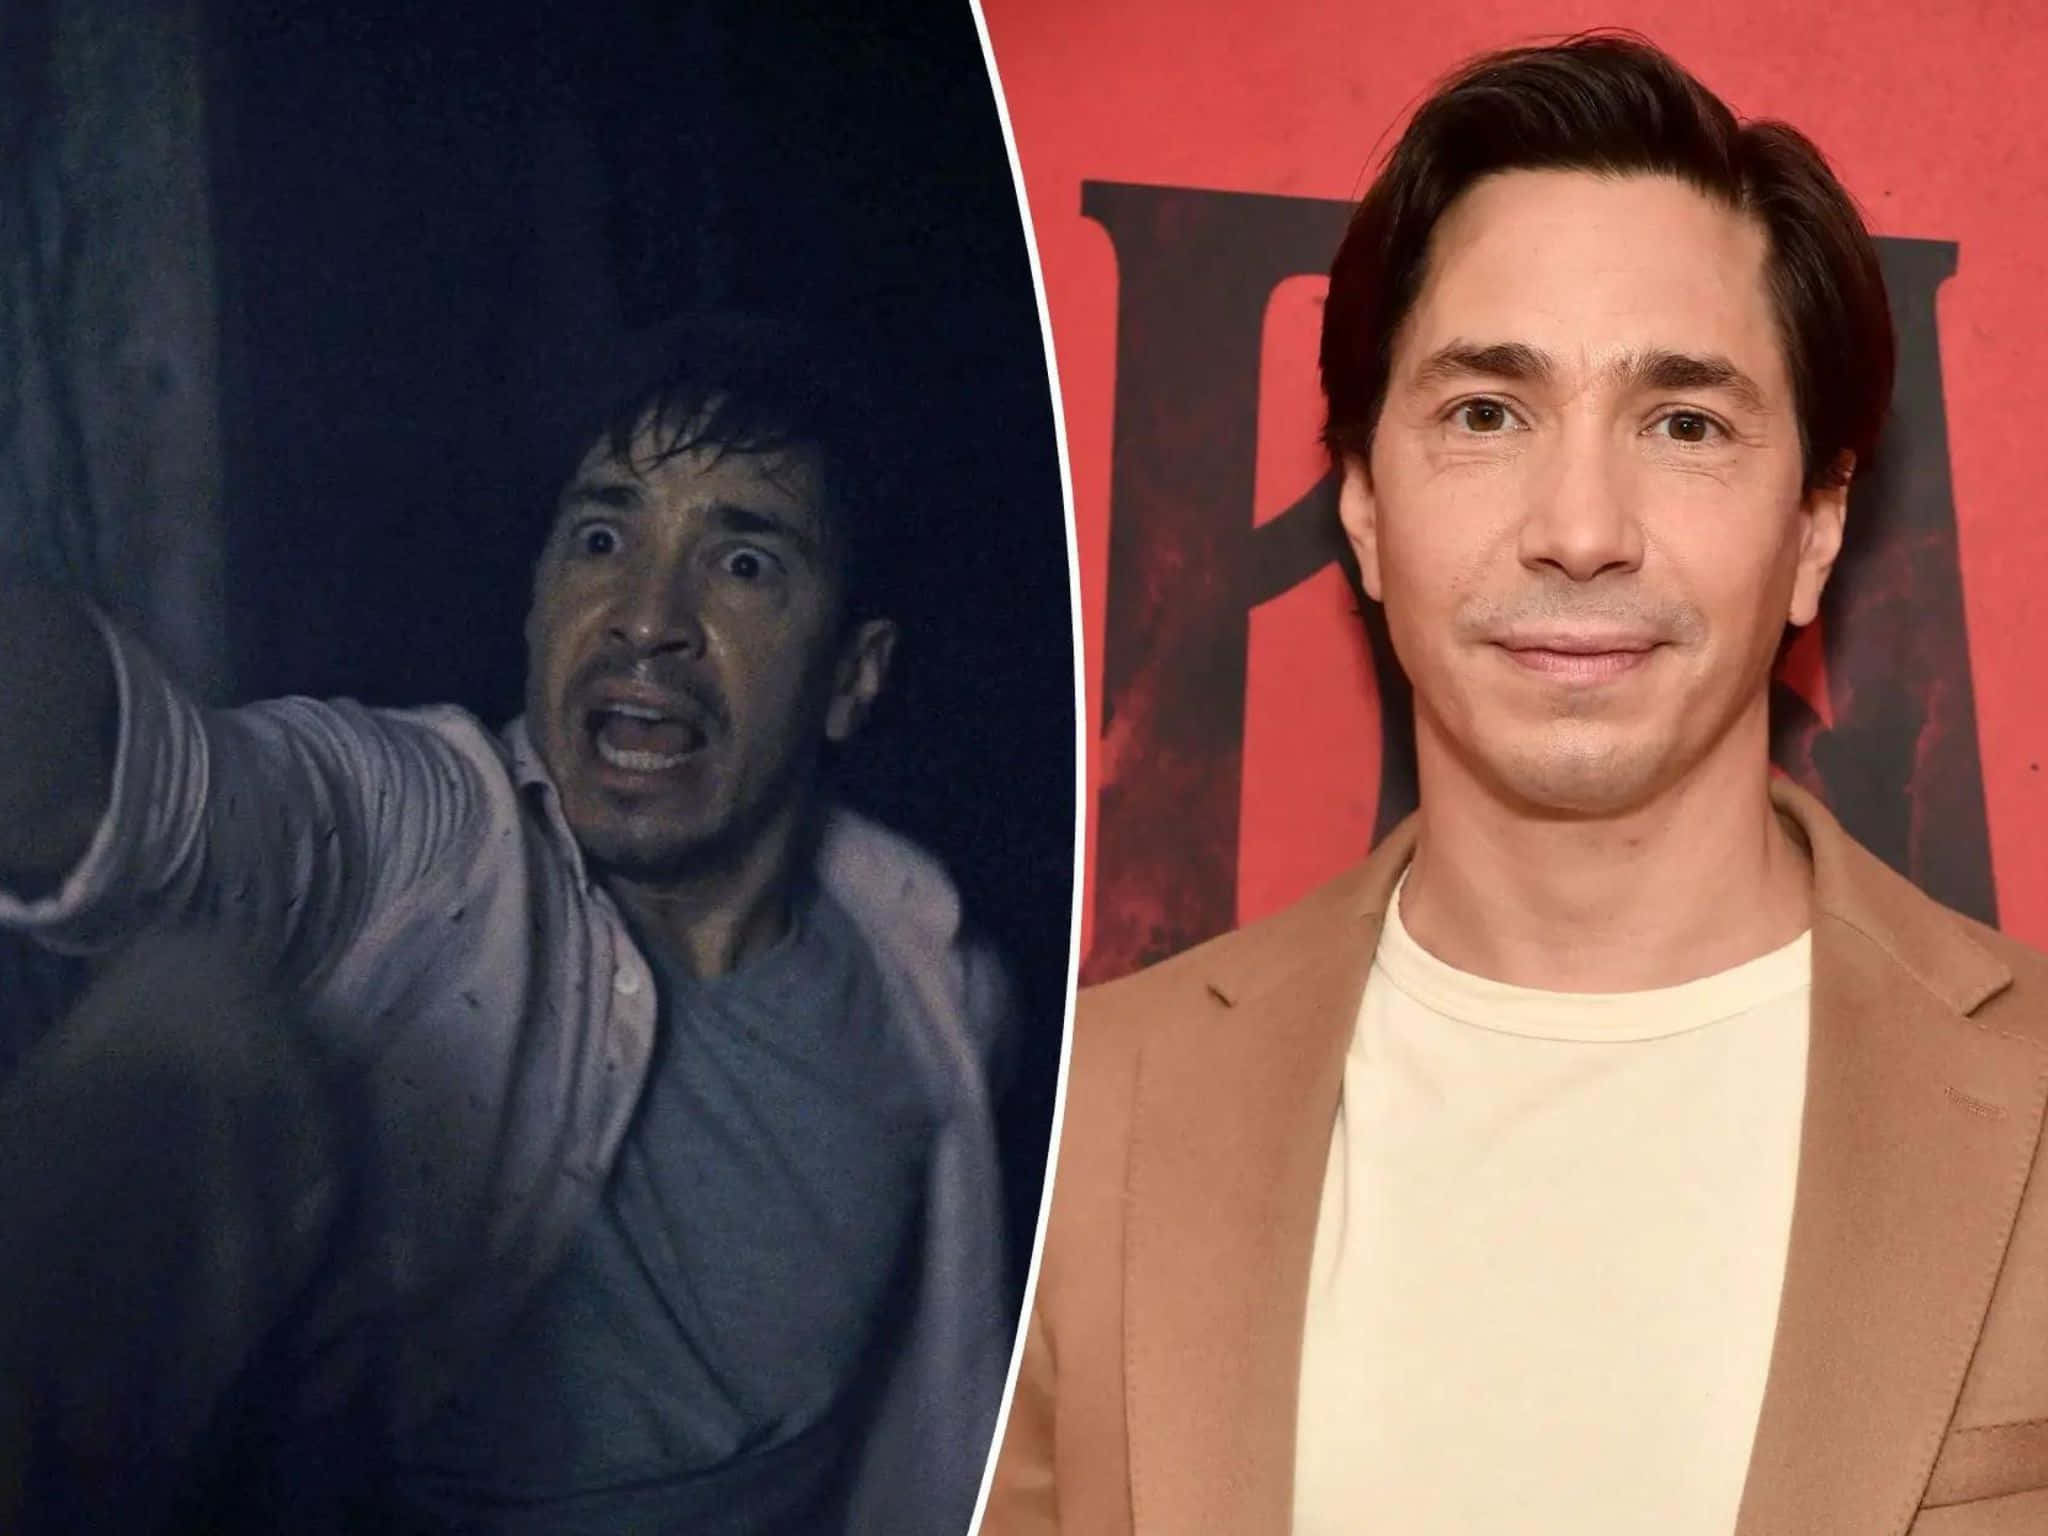 Actor Justin Long smiling during an event Wallpaper